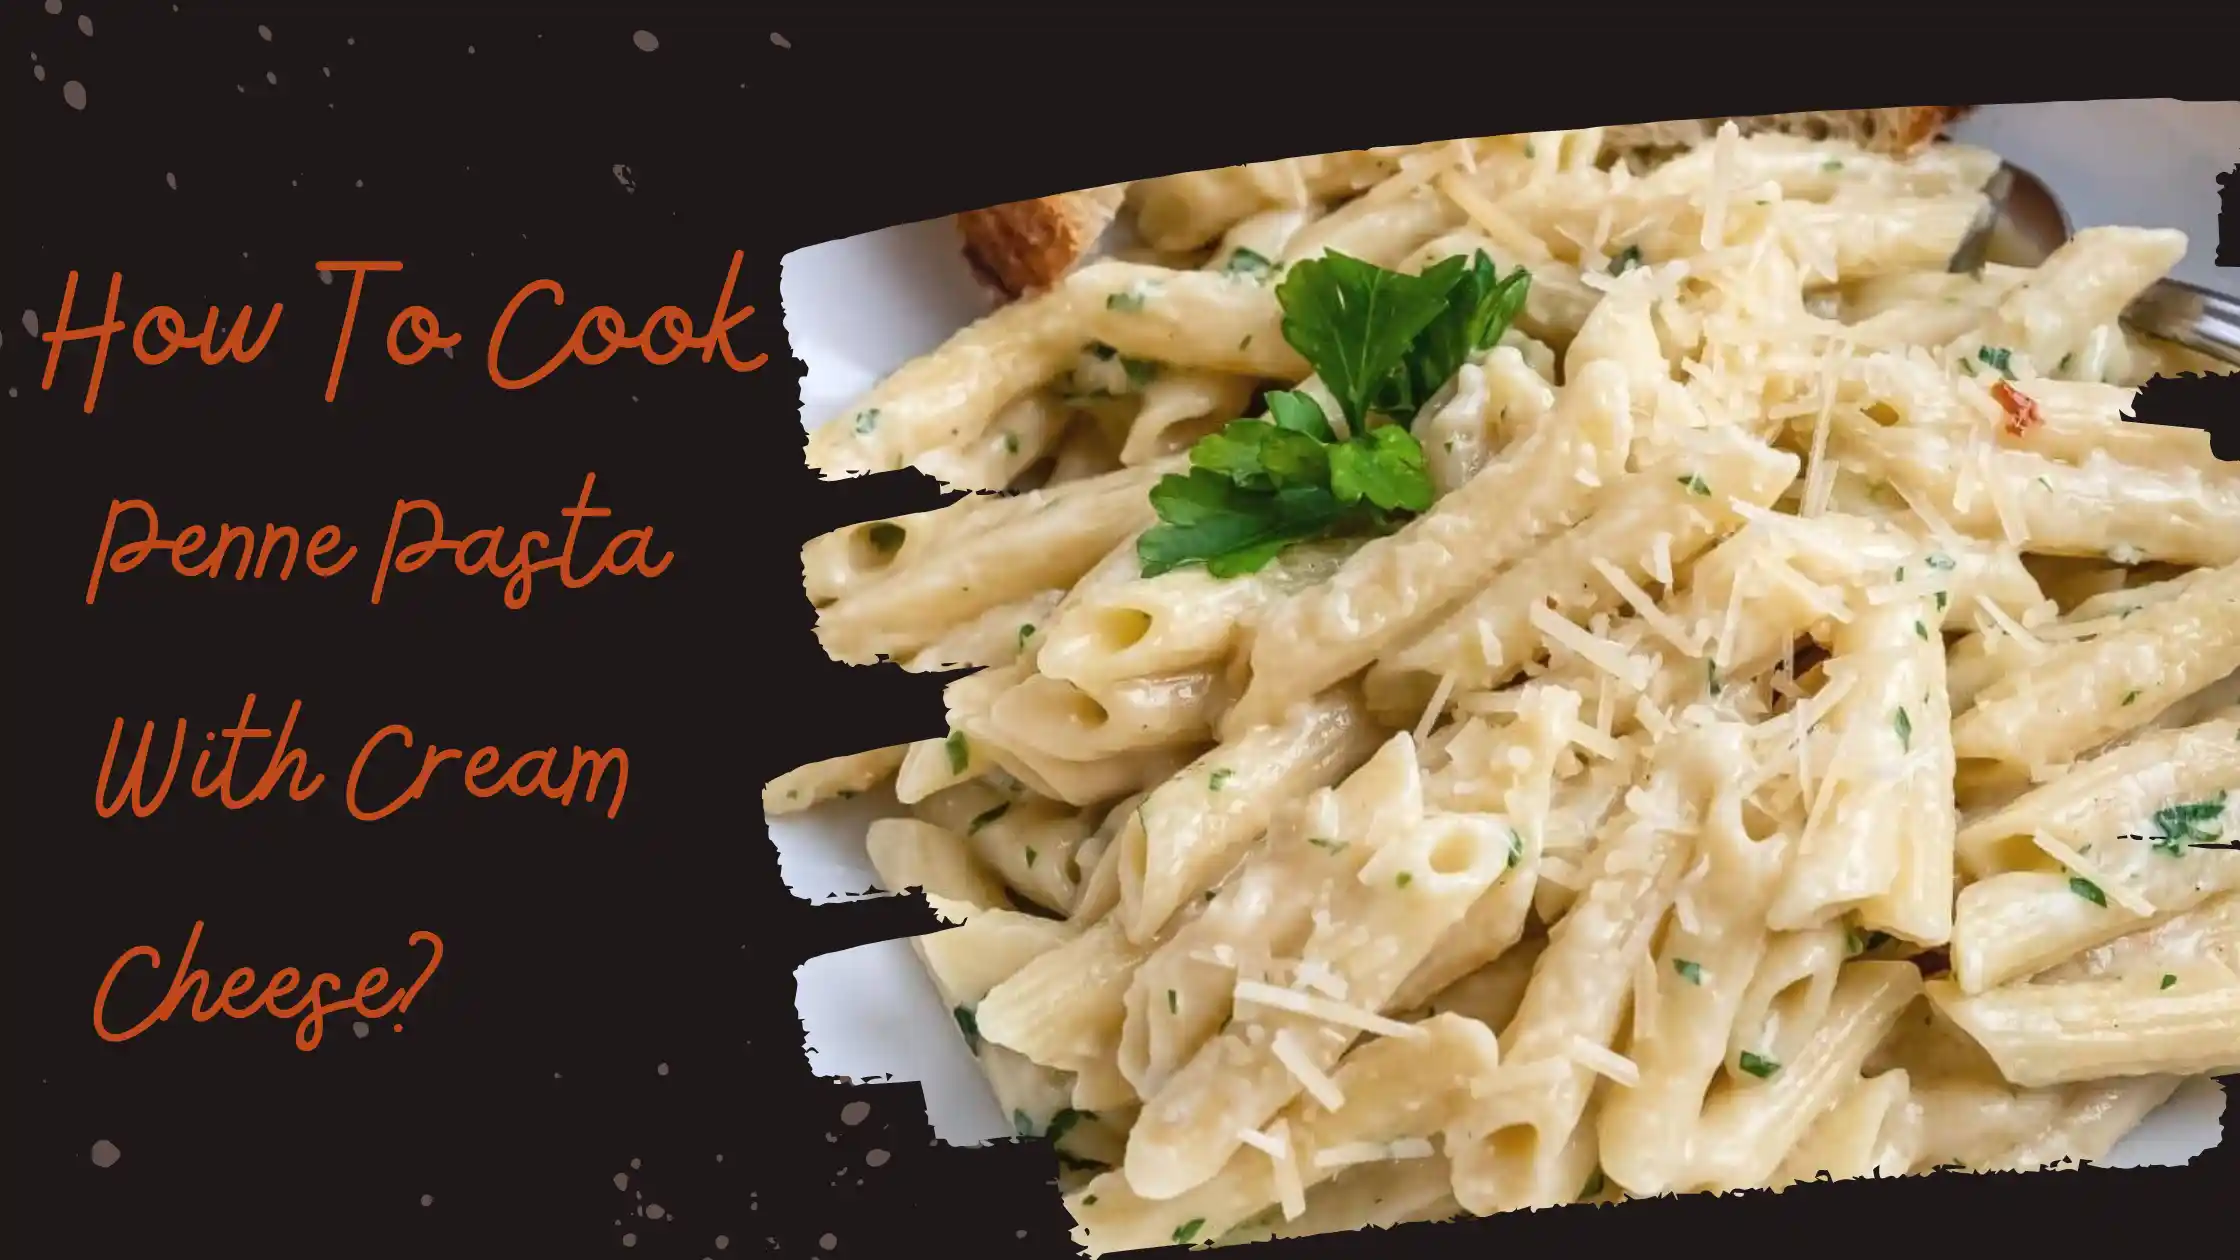 Penne Pasta With Cream Cheese